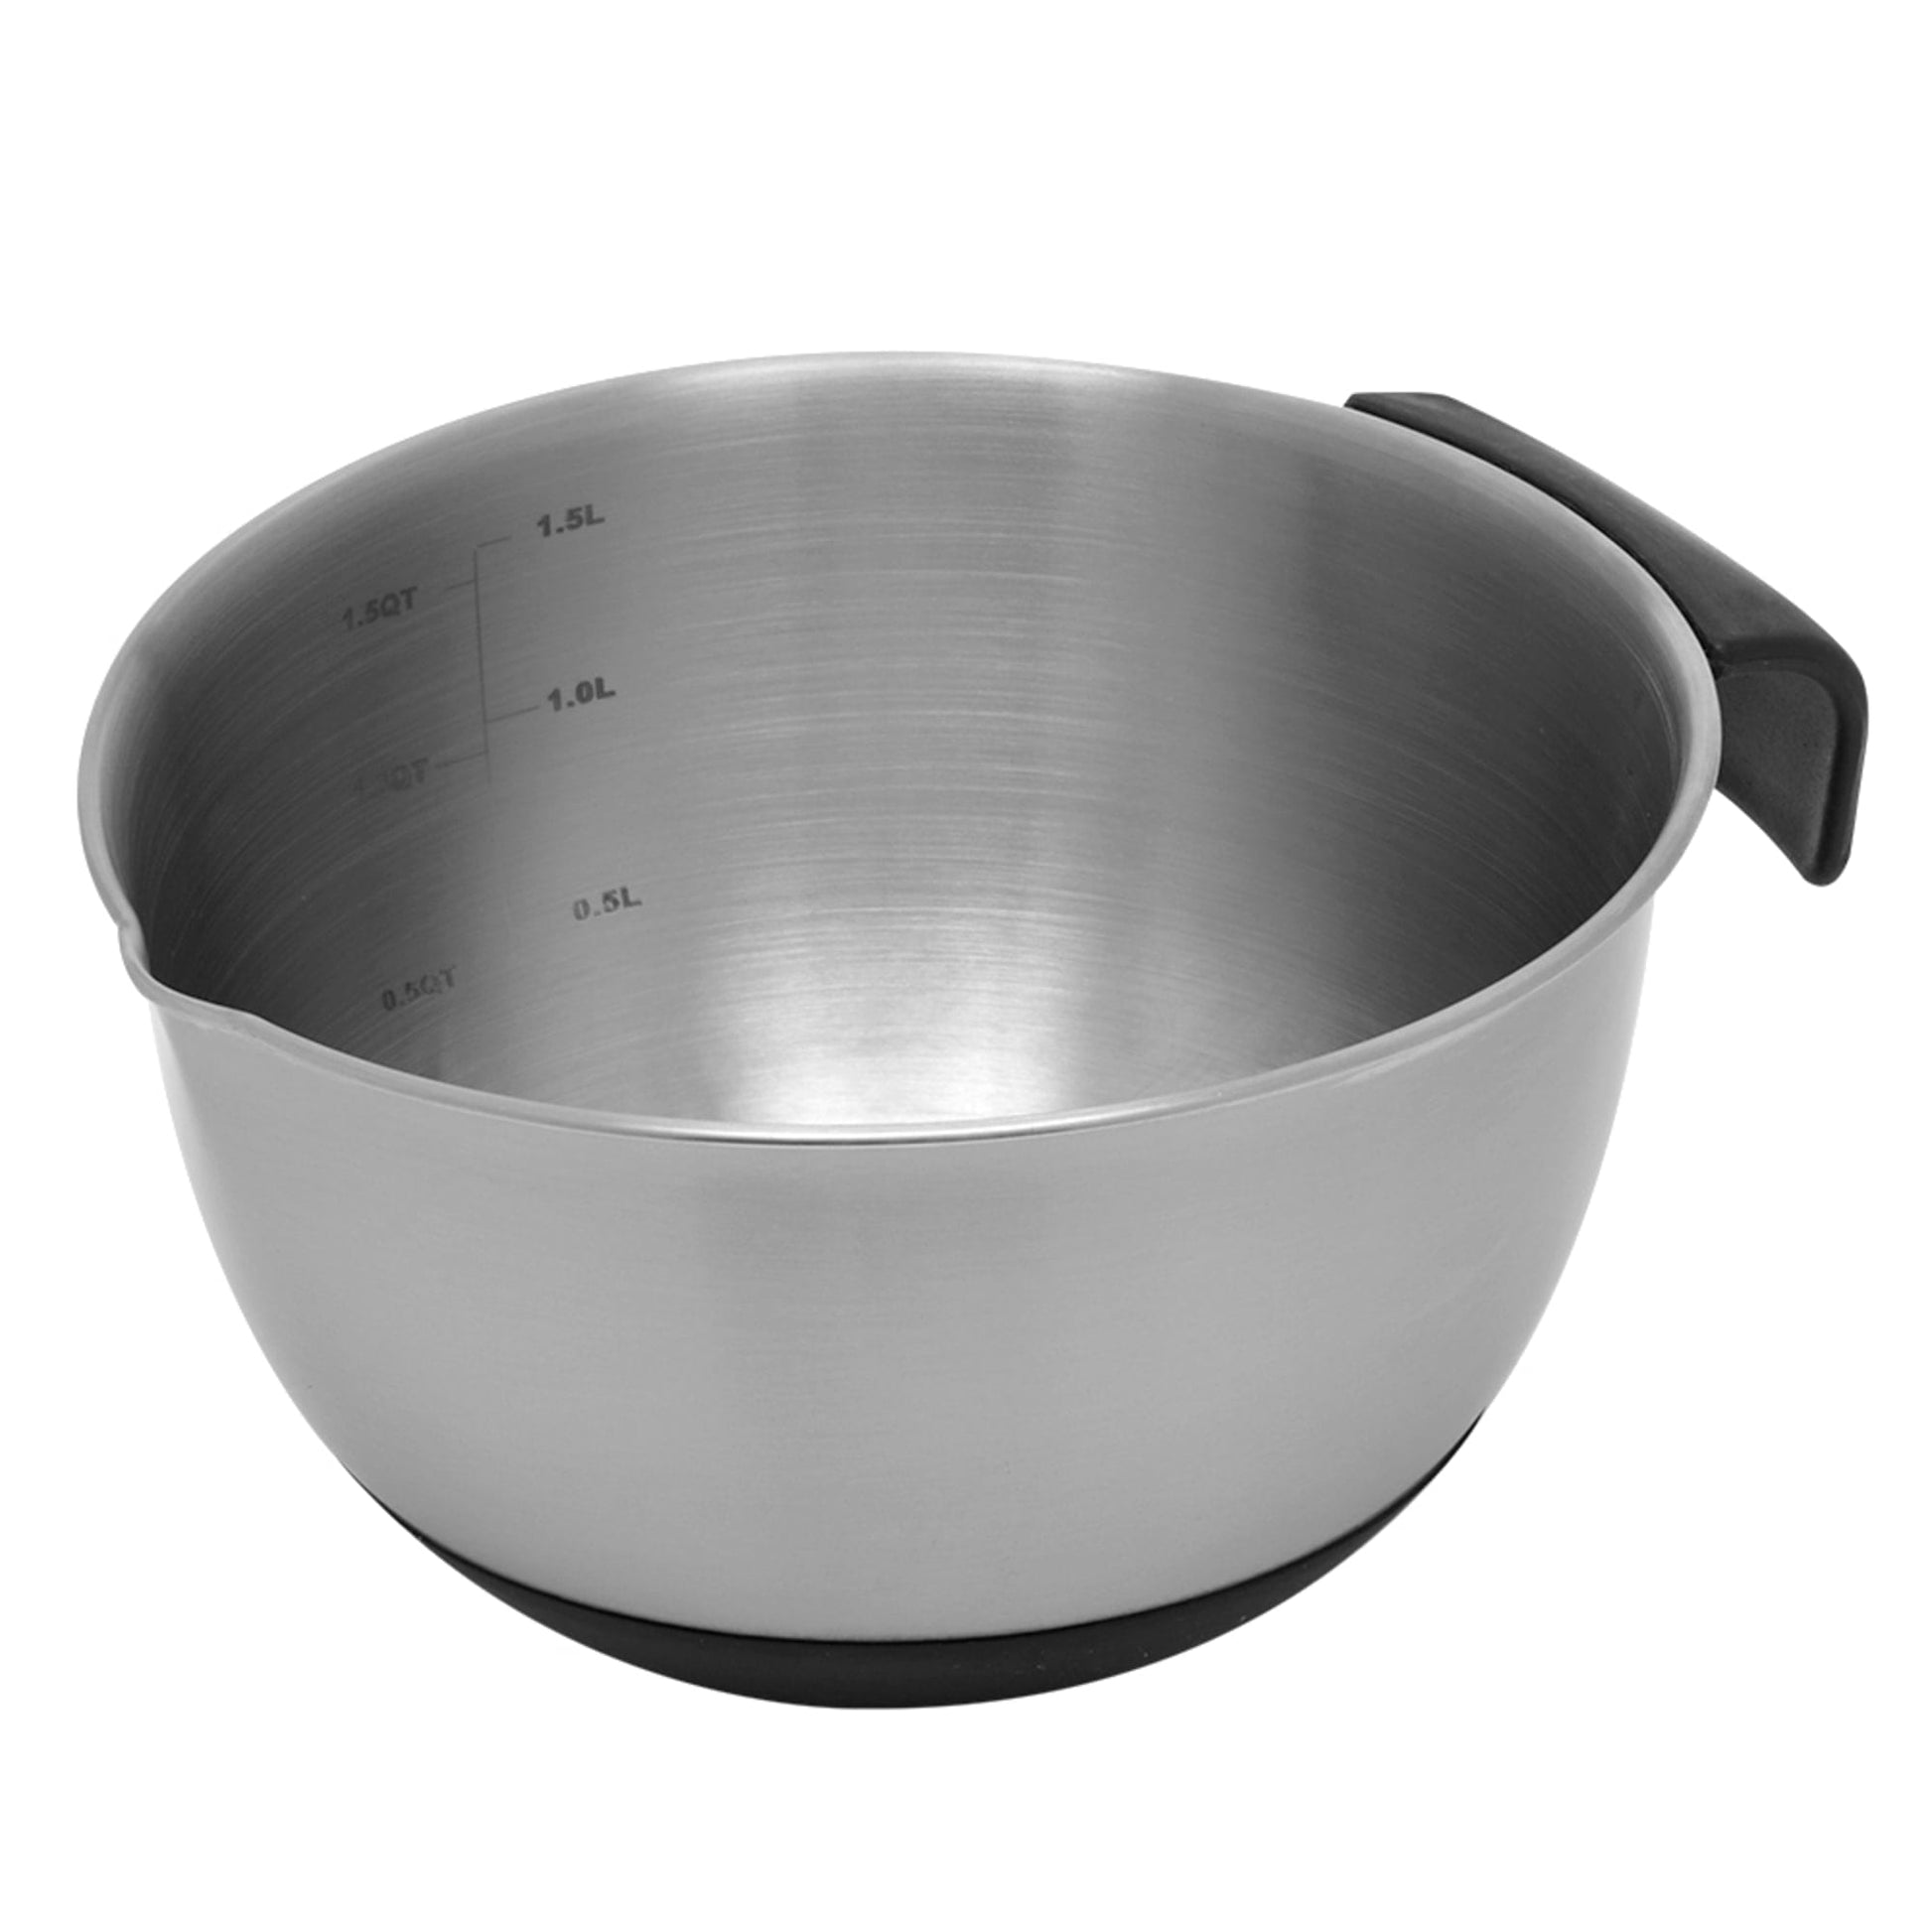 1.5 Qt. Stainless Steel Mixing Bowl with Measurements, Non-Skid